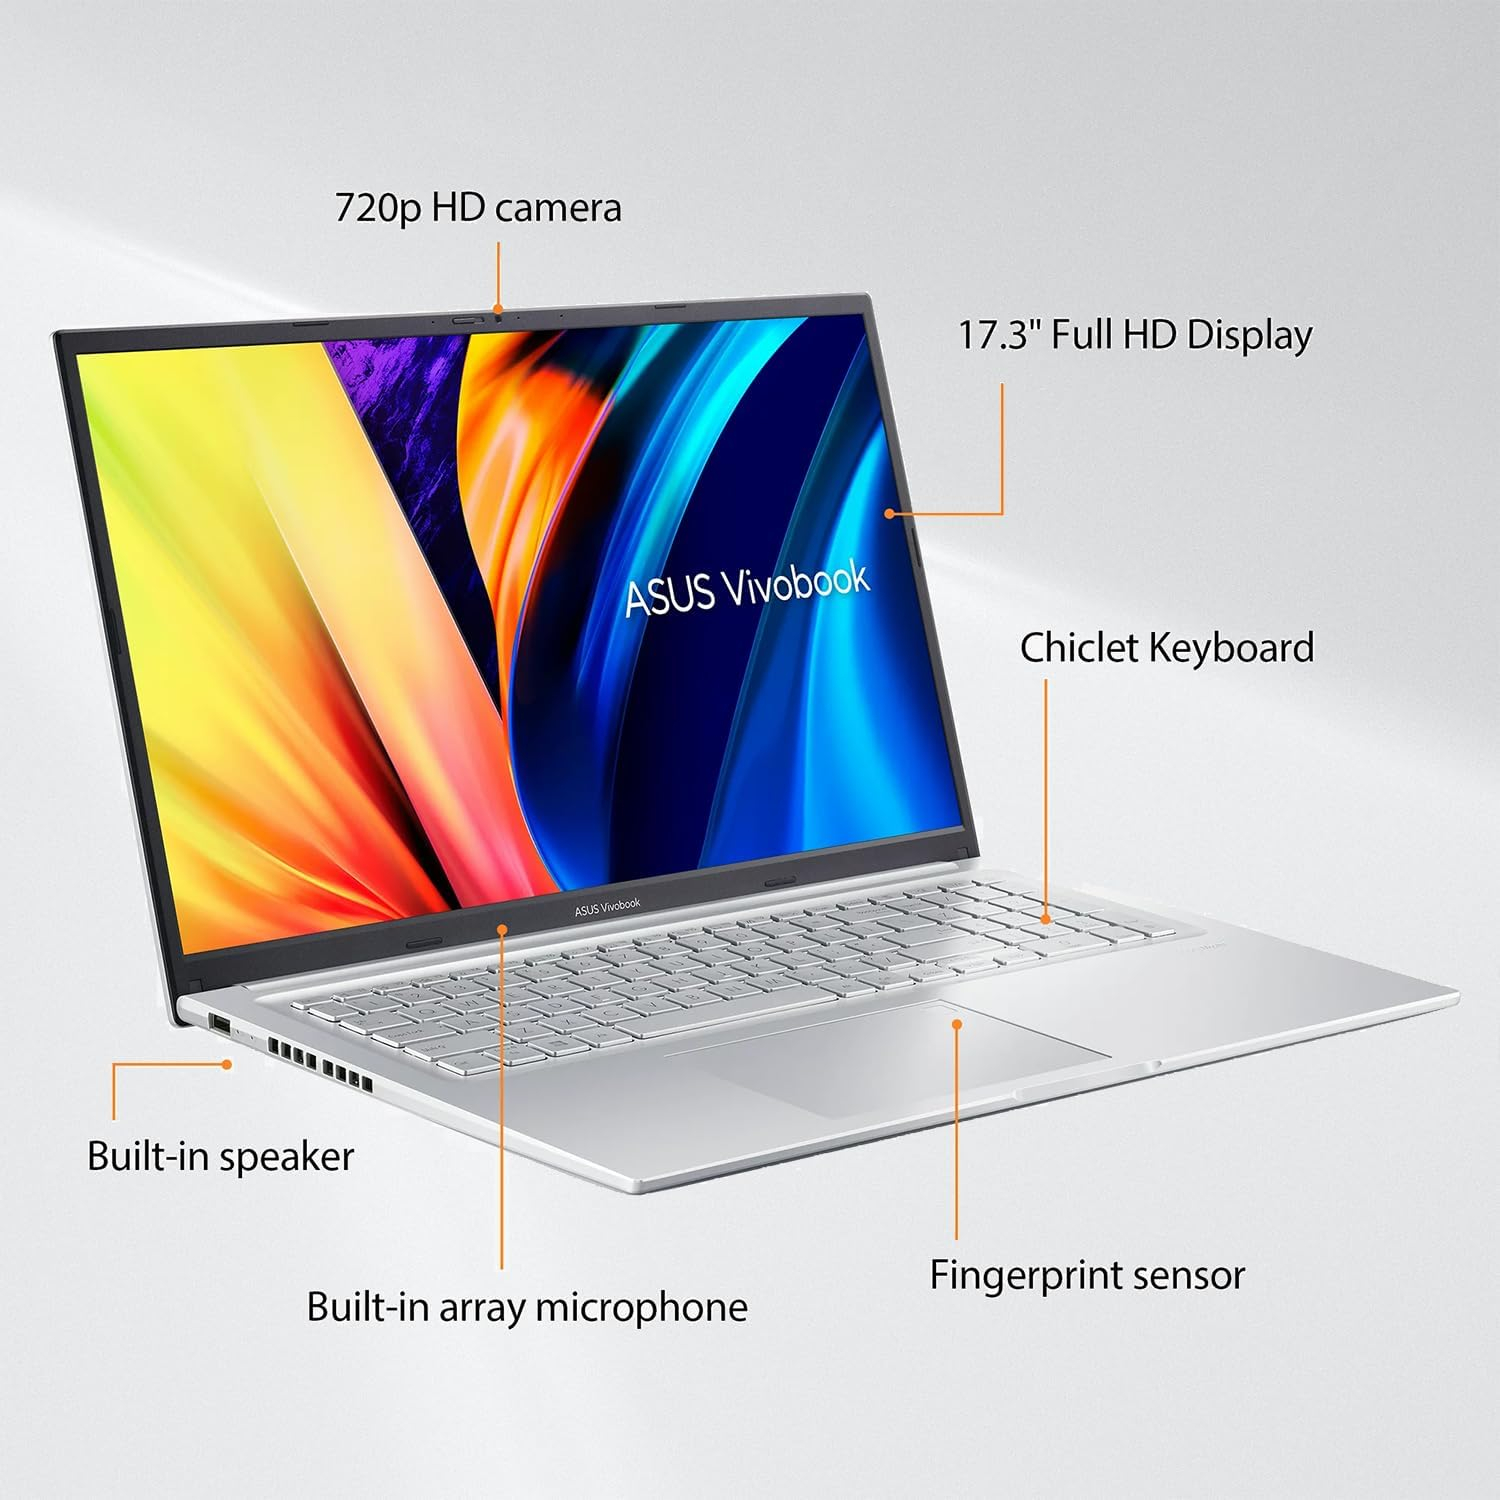 ASUS [Holiday Deals] Vivobook Laptop, Student and Business, 17.3 FHD Display, Intel Core i3-1220P Processor, 16GB RAM, 512GB PCIe SSD, Webcam, HDMI, FP Reader, Wi-Fi 6, Windows 11 Home, Silver